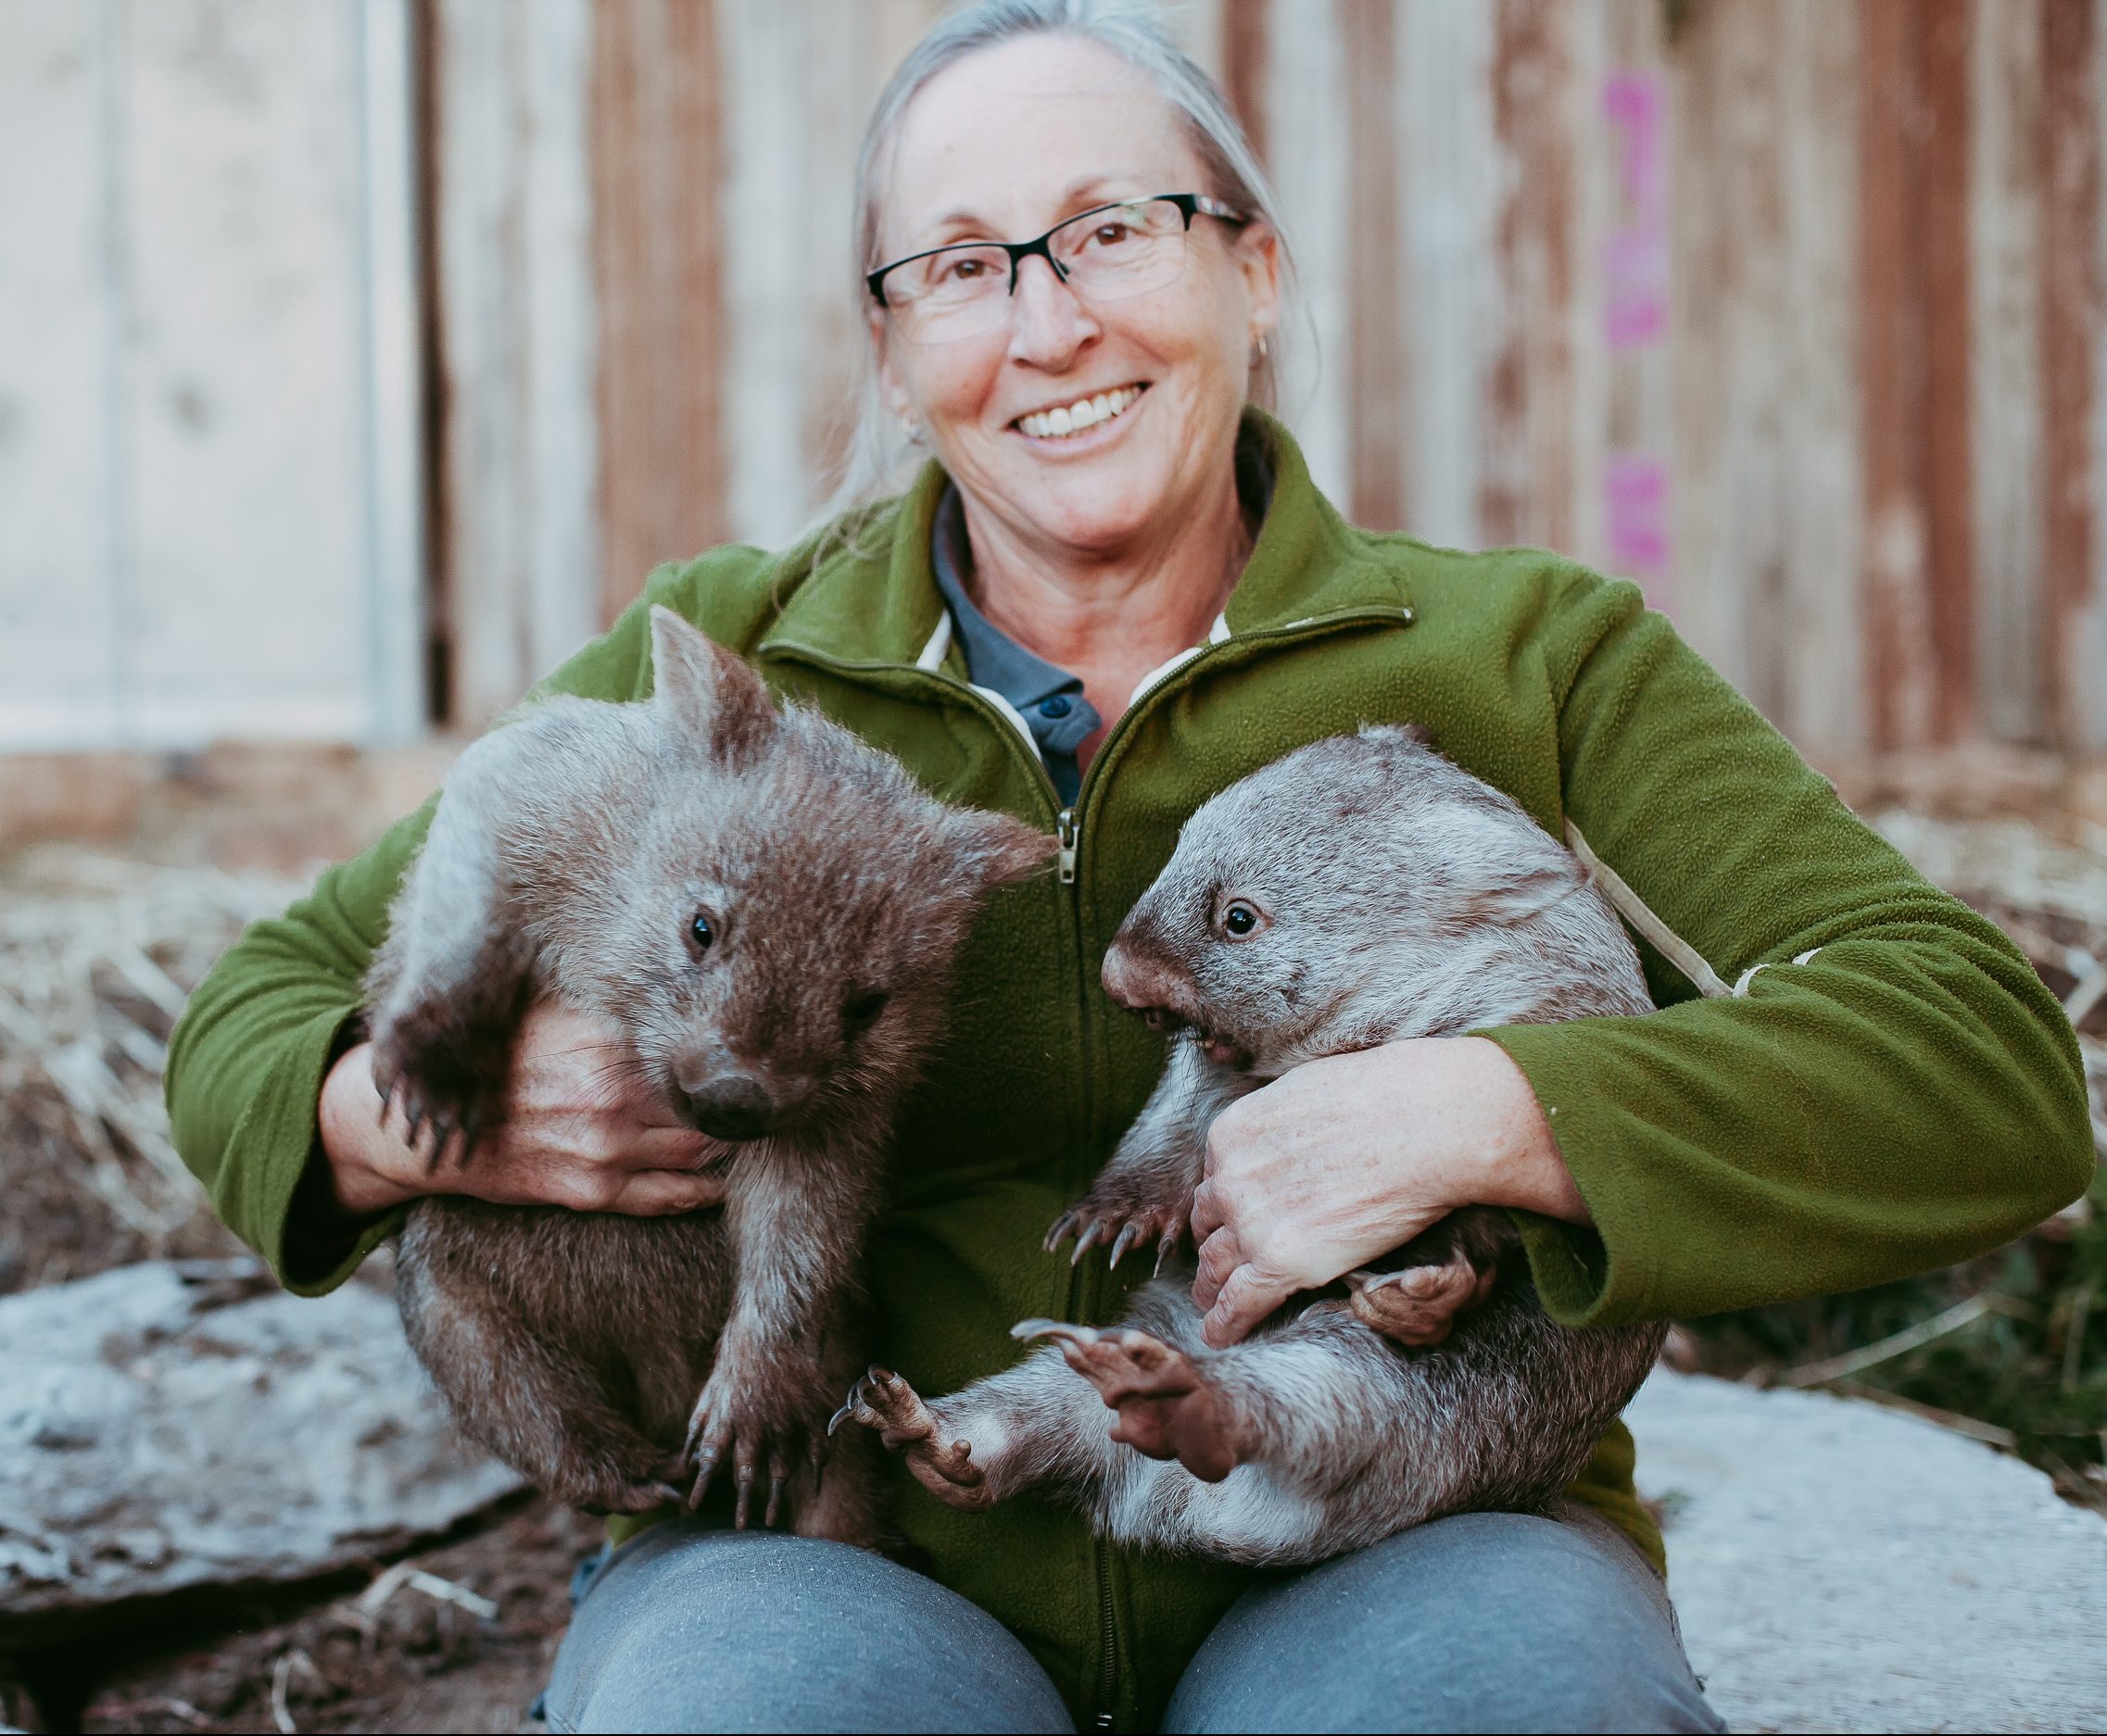 Rescued wombats released into the wild after two years of recovery